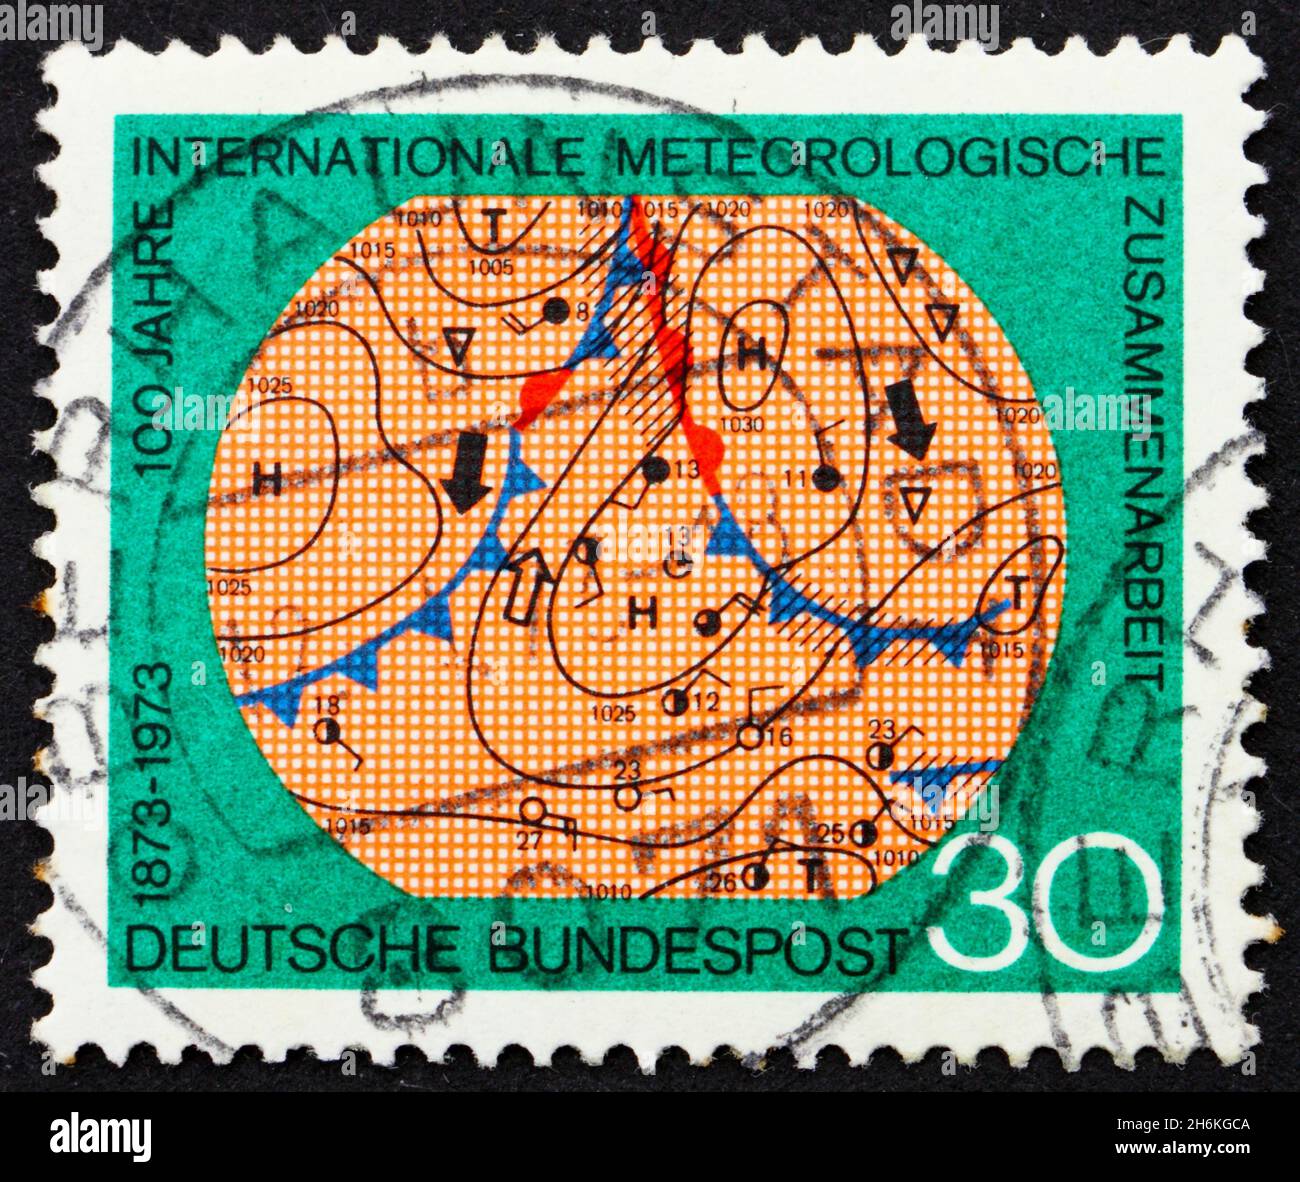 GERMANY - CIRCA 1973: a stamp printed in the Germany shows Meteorological map, centenary of international meteorological cooperation, circa 1973 Stock Photo